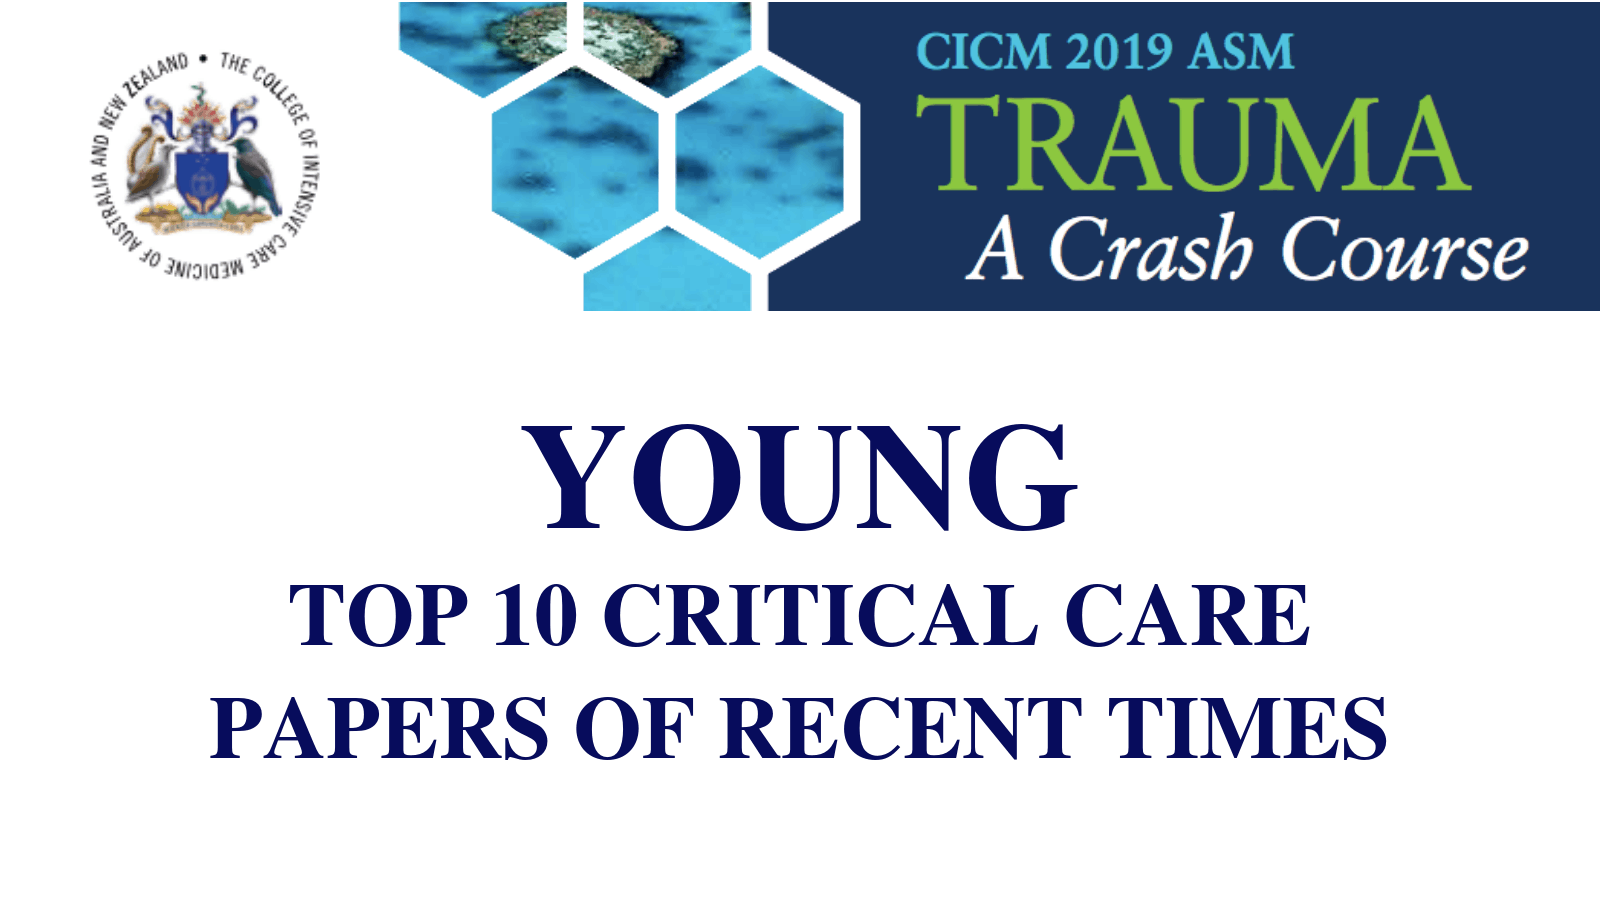 Top 10 critical care papers